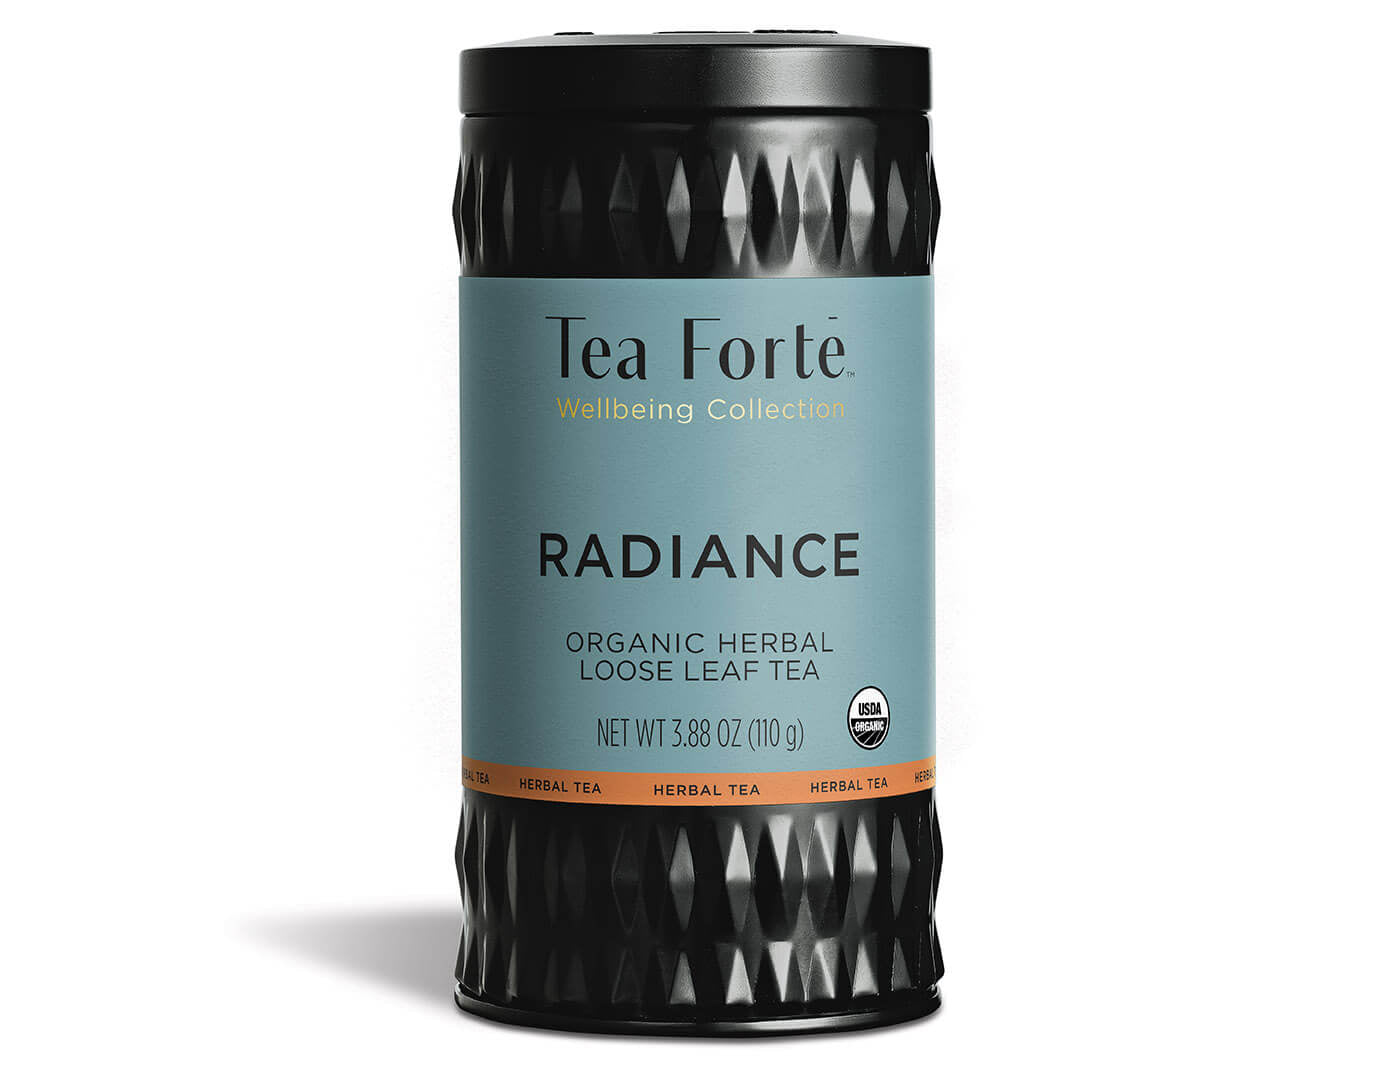 Radiance tea in a canister of loose tea